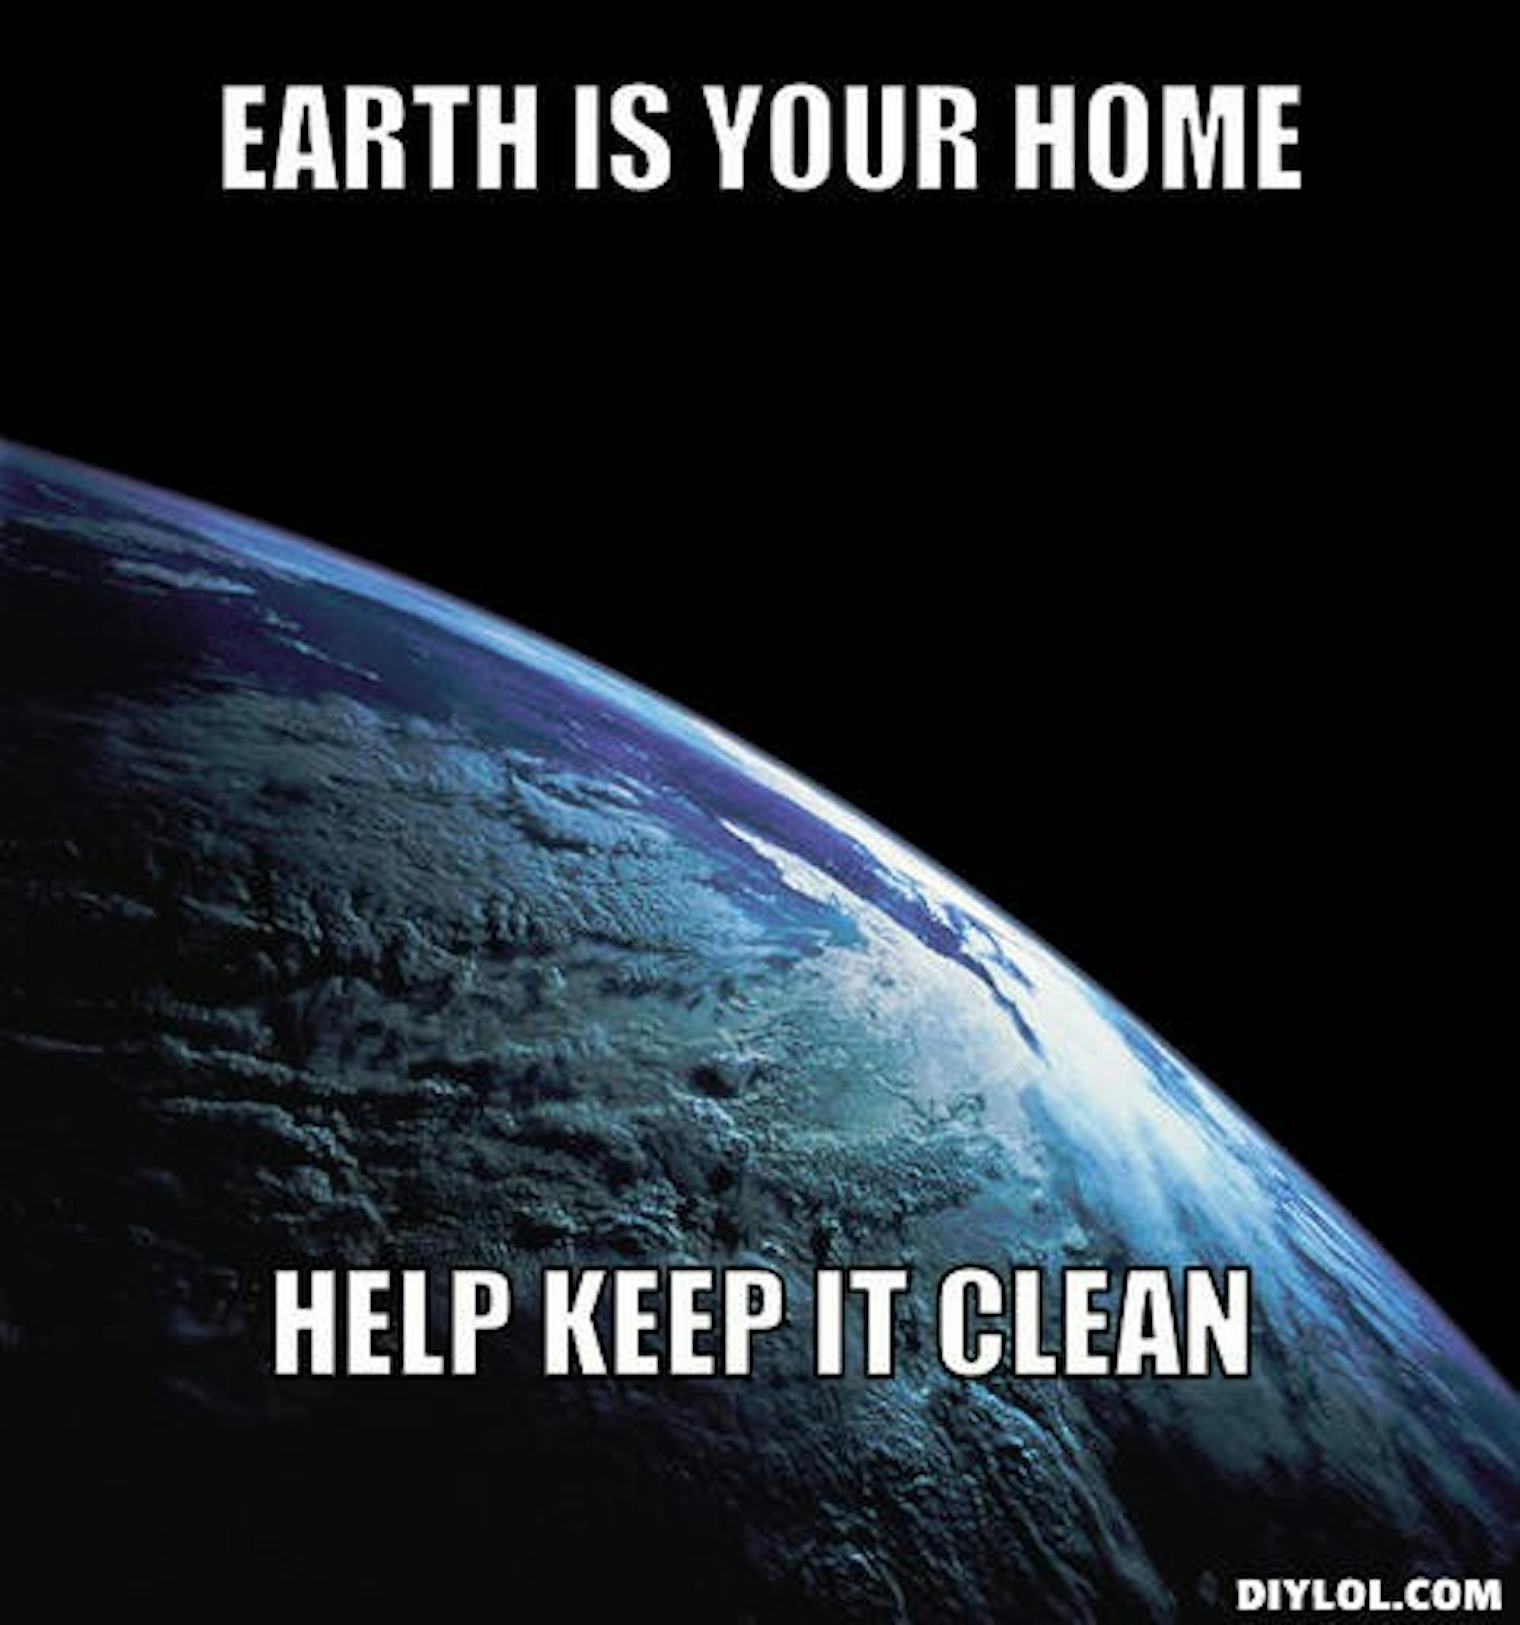 13 Earth Day Memes That Will Make You Laugh, And Also Make You Think